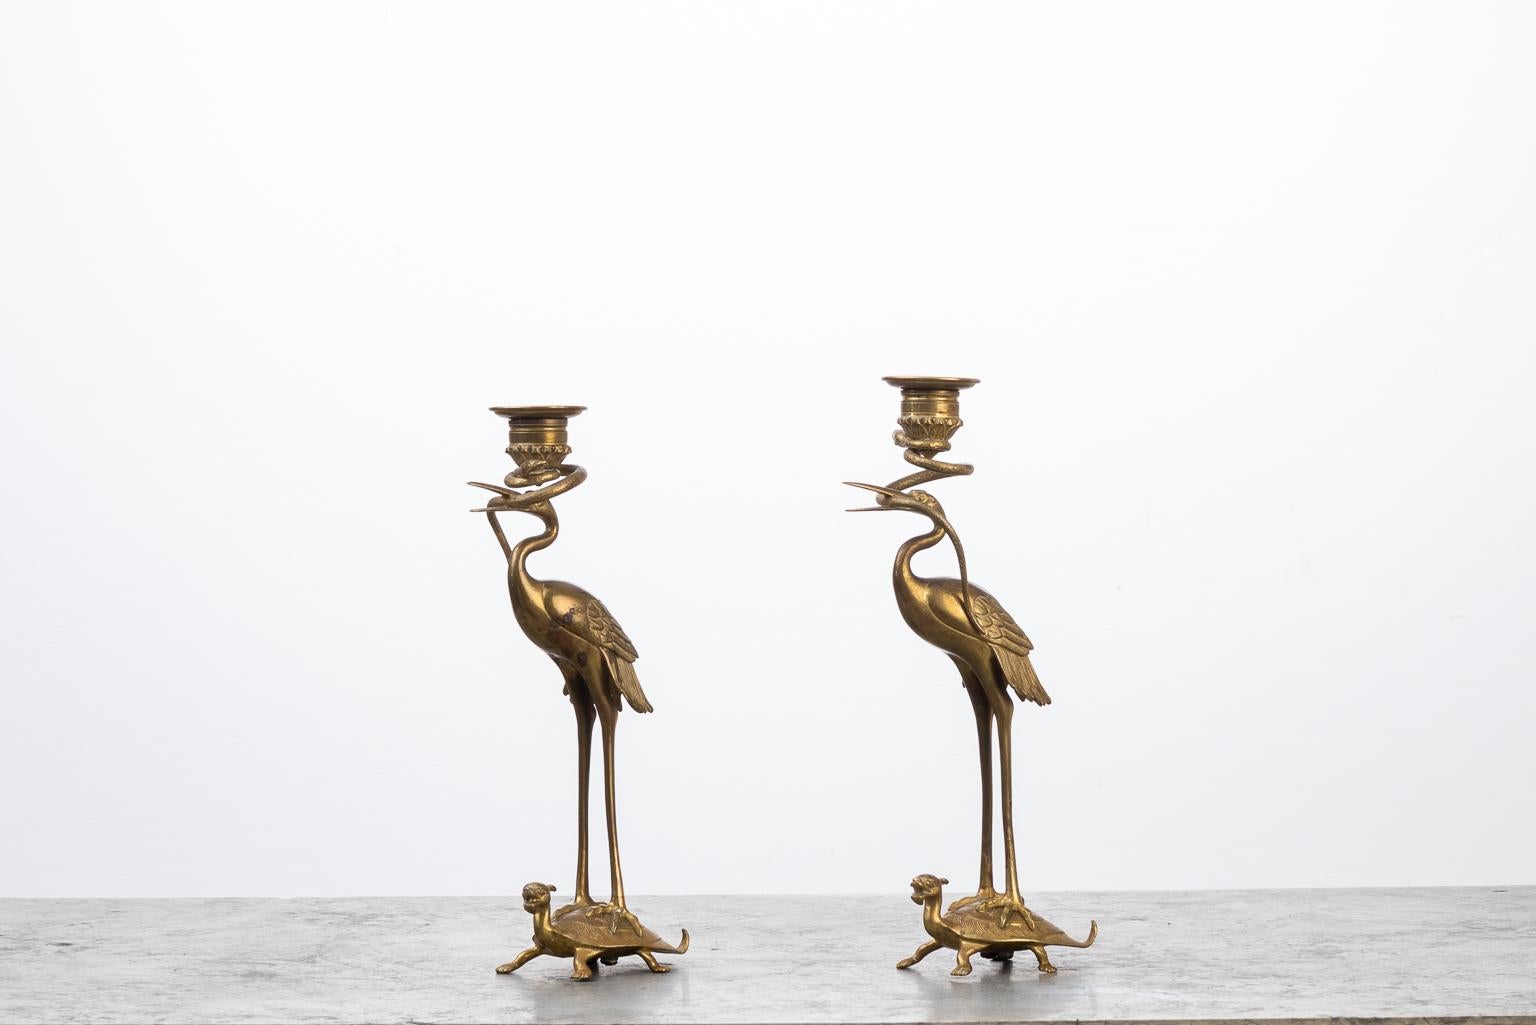 Swedish Brass Flamingo Candlesticks from the 1880s